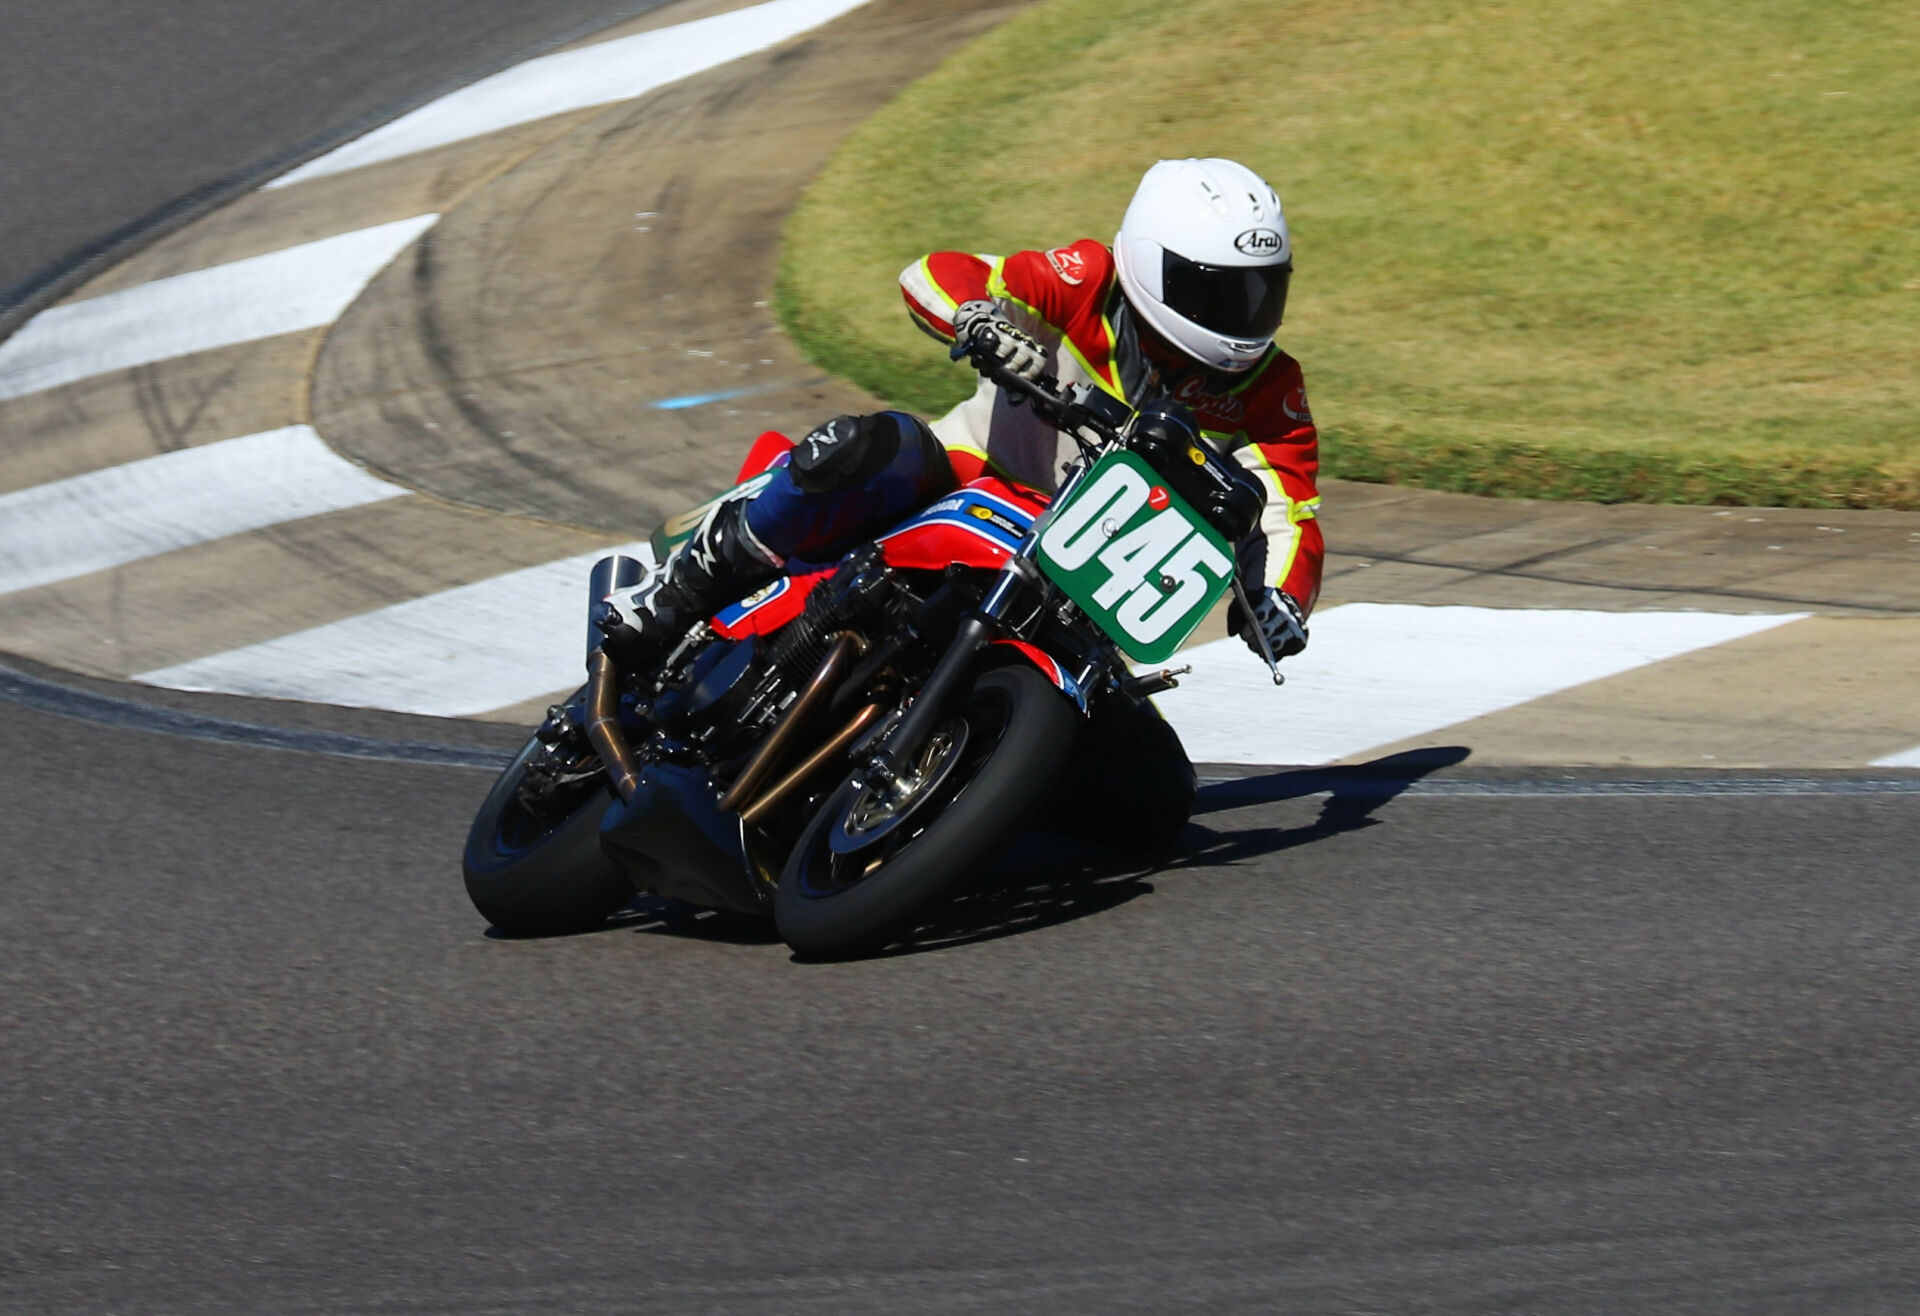 Curtis Adams (045), riding his 1981 Honda CB750F, won both Vintage Cup races at the 2022 AHRMA season finale at Barber Motorsports Park, but the Vintage Cup Championship went to Jesse Davis. Photo by etechphoto.com, courtesy AHRMA.